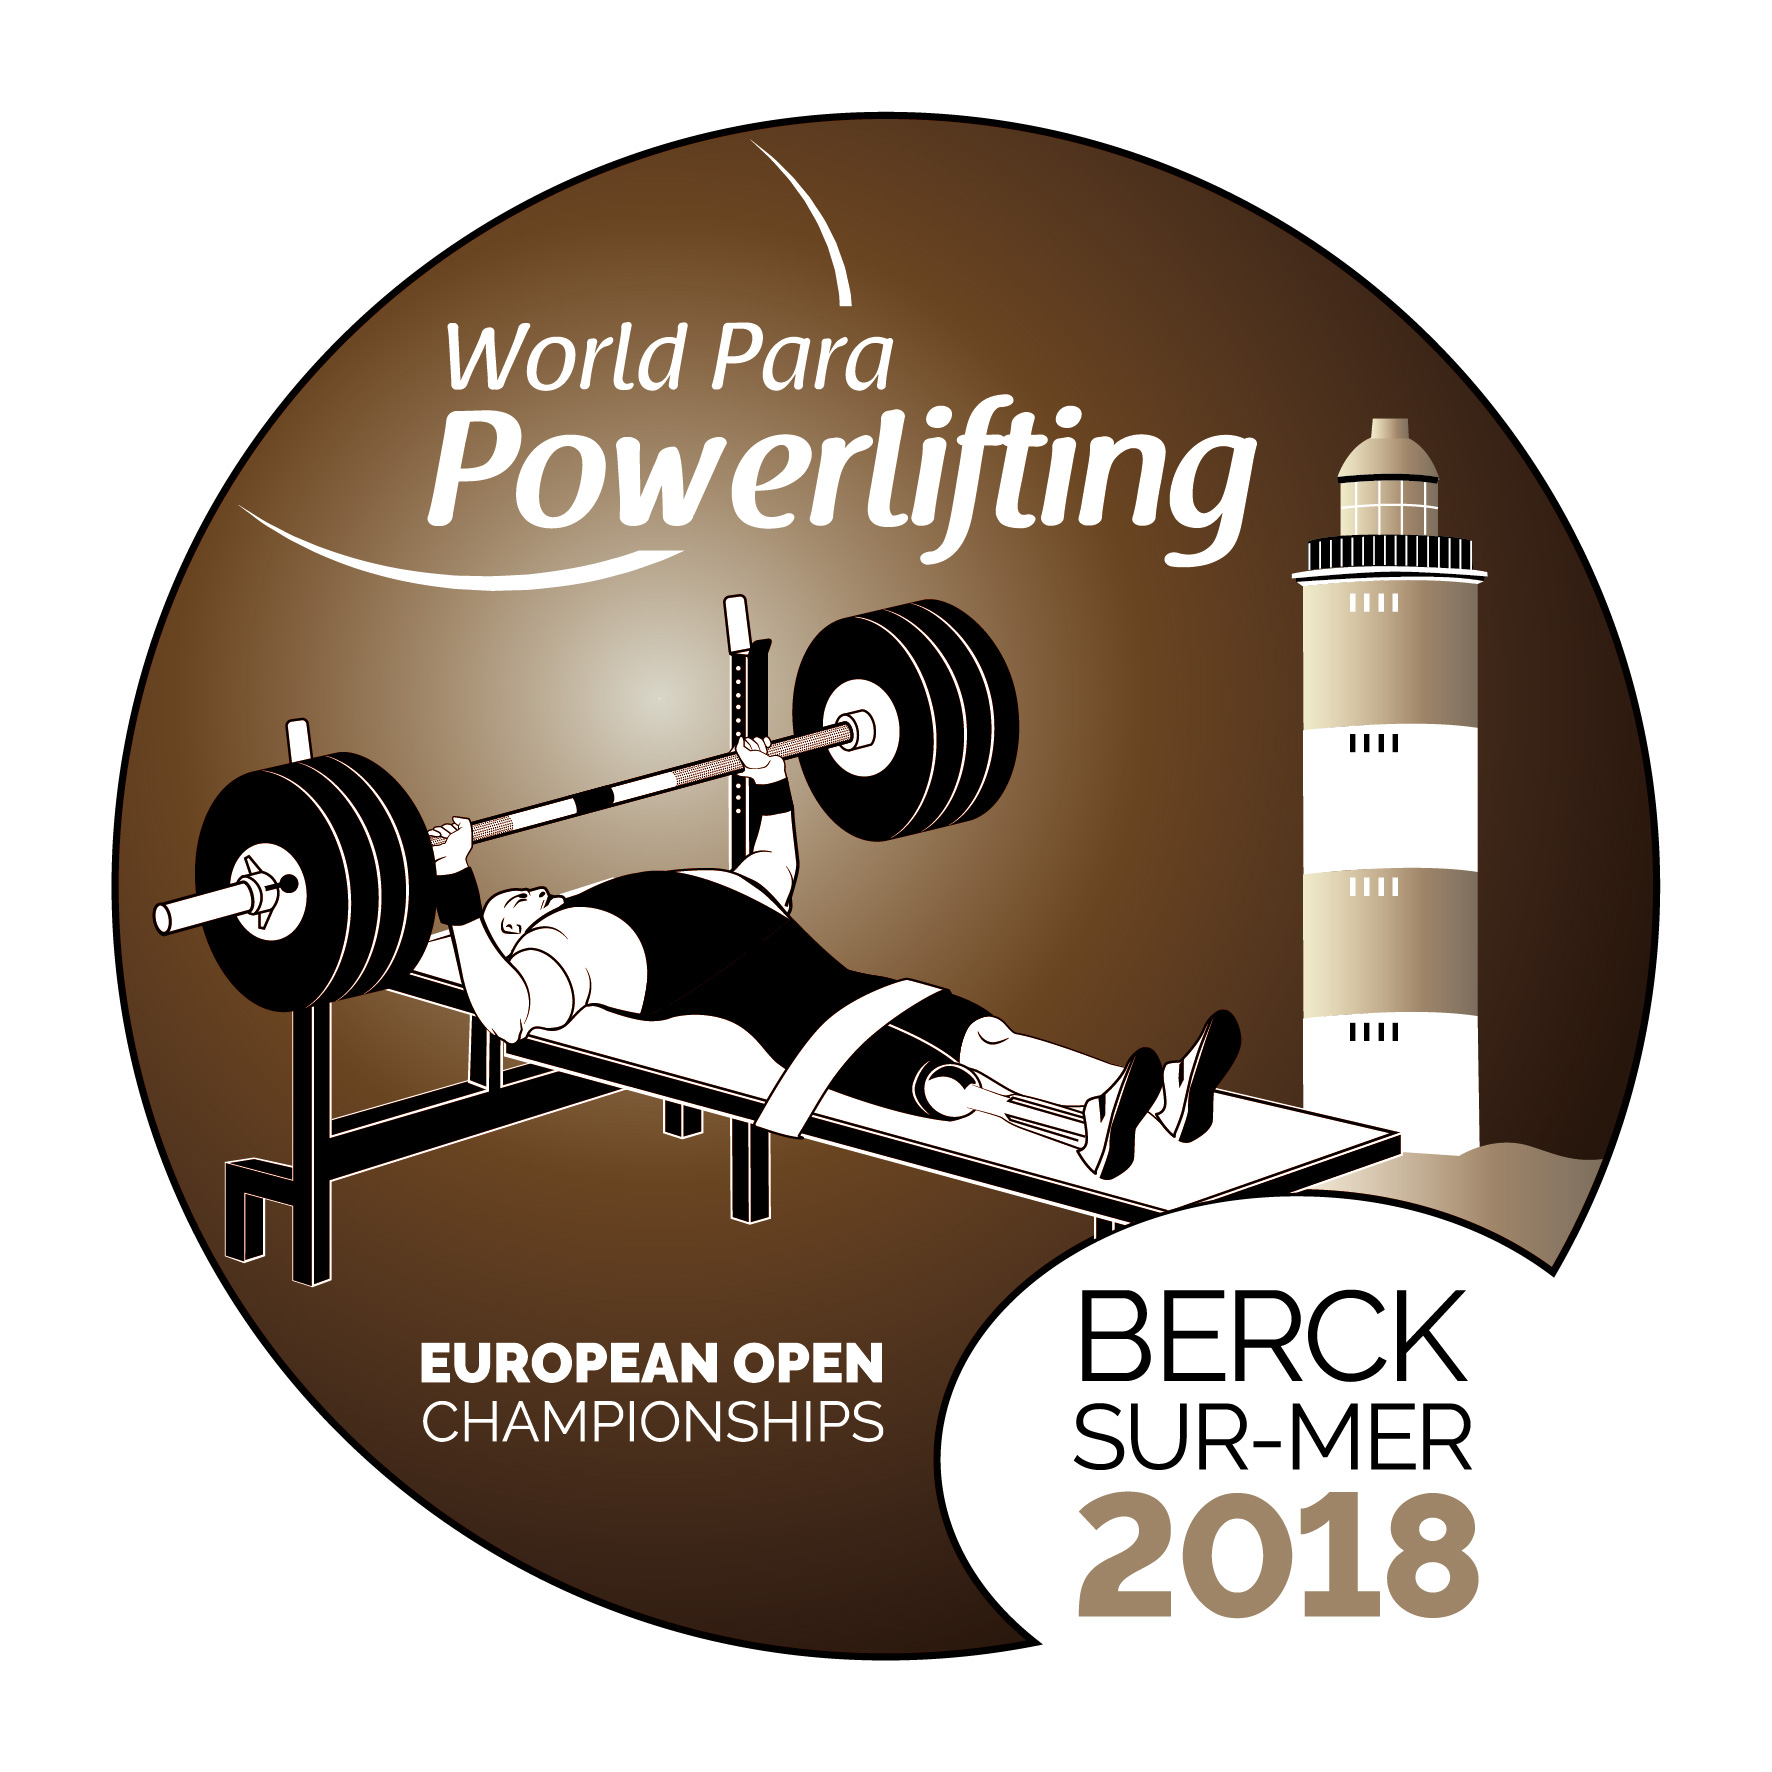 The official logo of the 2018 World Para Powerlifting European Open Championships